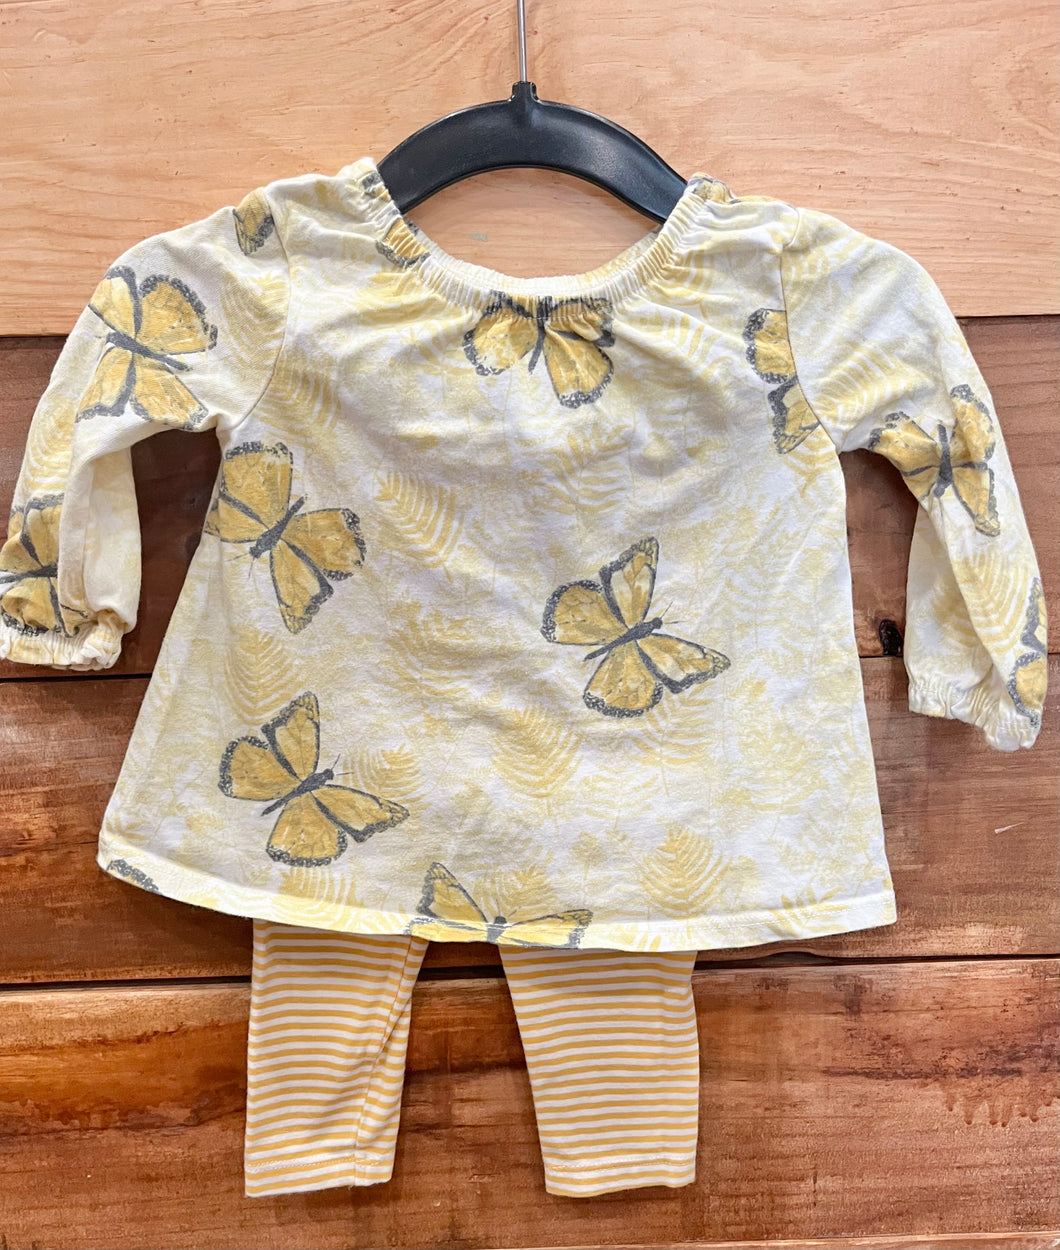 Burt's Bees Yellow Butterfly 2pc Outfit Size 3-6m